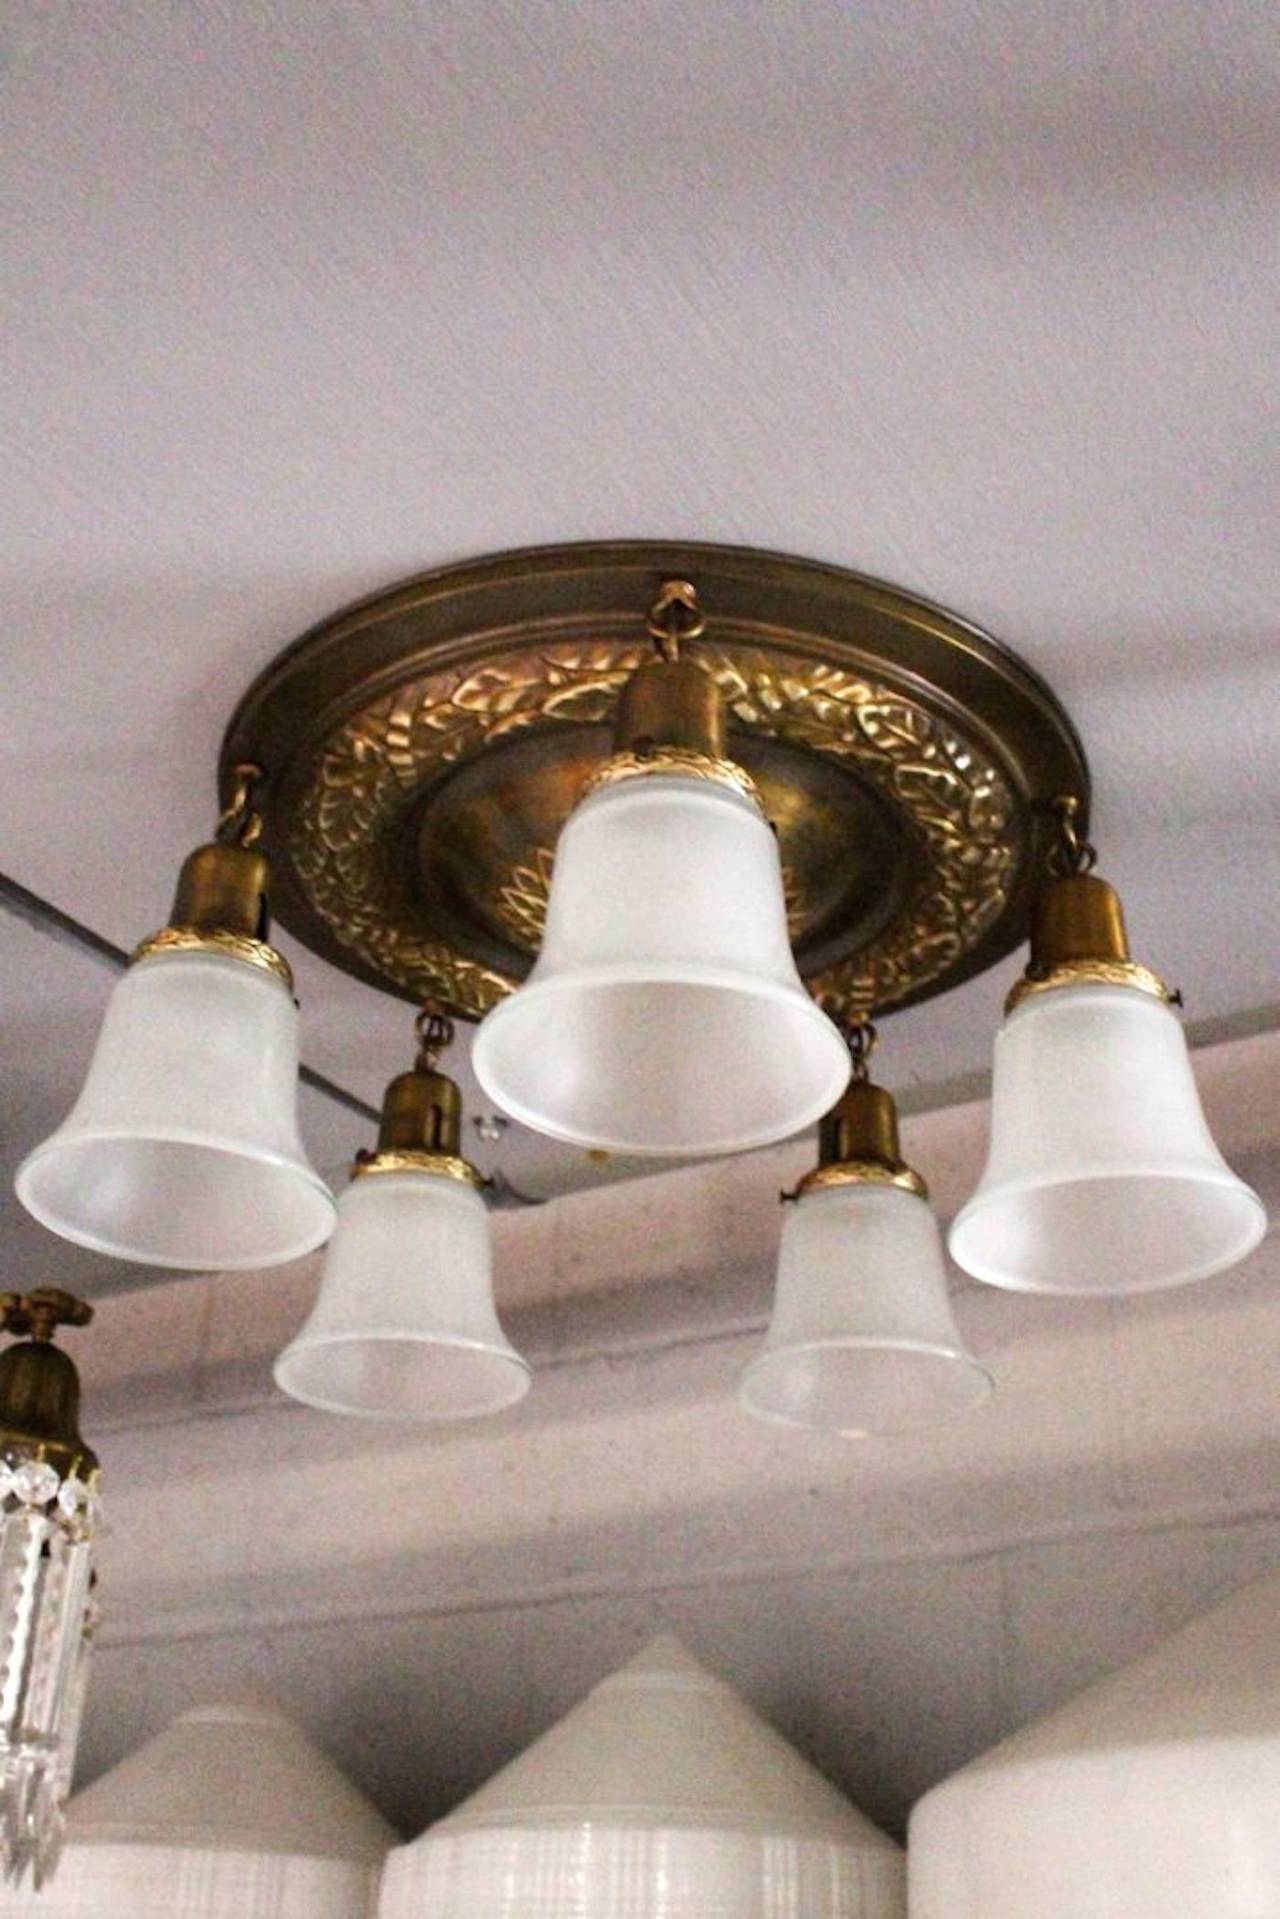 Circa 1915. Hard to find Classical Revival style flush mount found in Kansas City, Missouri. (5-Light) Fitted with sand blasted glass shades. Cleaned, rewired, restored, and ready to hang. 

Measurements: 9